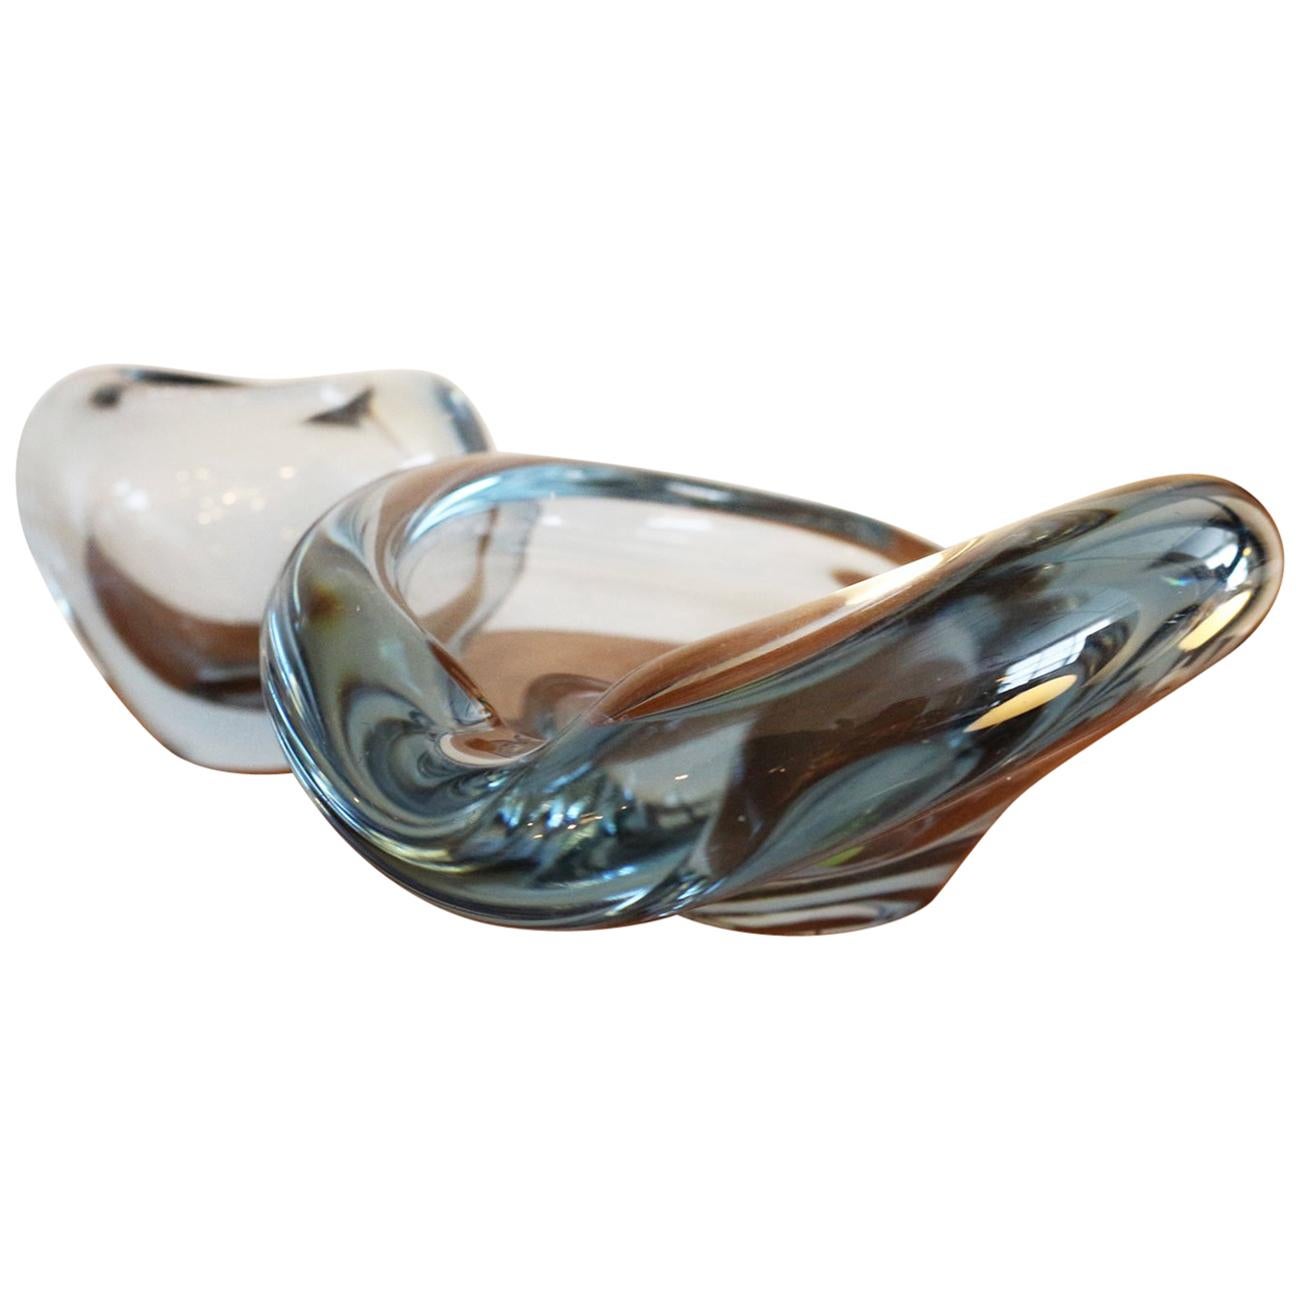 A striking petite Danish modern decorative glass dish. Glass is clear with a faint sky blue color.  Originally intended to be an ashtray this piece is beautiful as a decorative item or could function well as a candy or soap dish.  Measurements are